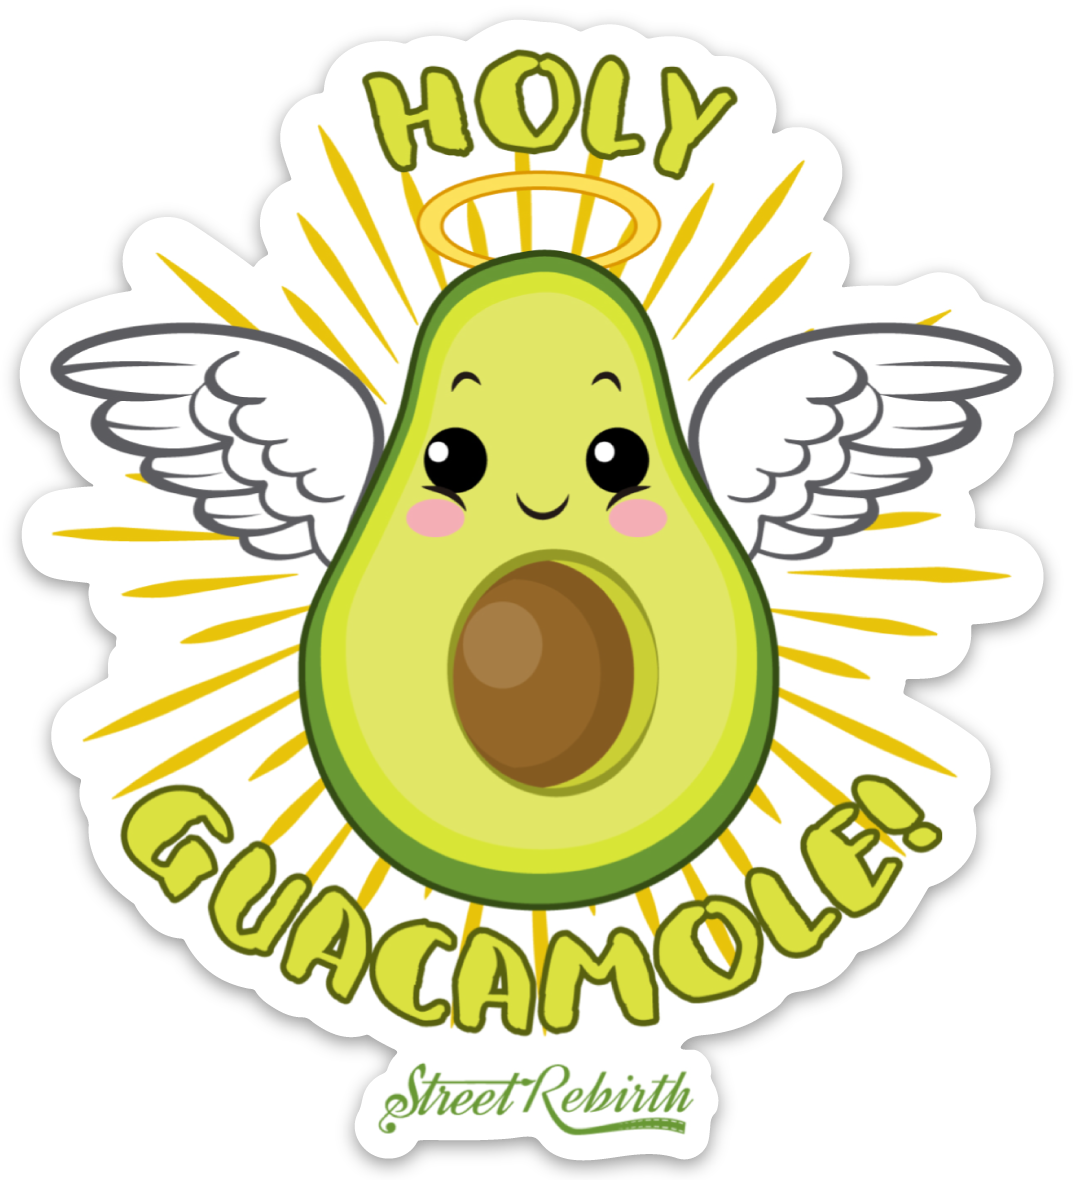 Holy Guacamole PUN STICKER – ONE 4 INCH WATER PROOF VINYL STICKER – FOR HYDRO FLASK, SKATEBOARD, LAPTOP, PLANNER, CAR, COLLECTING, GIFTING